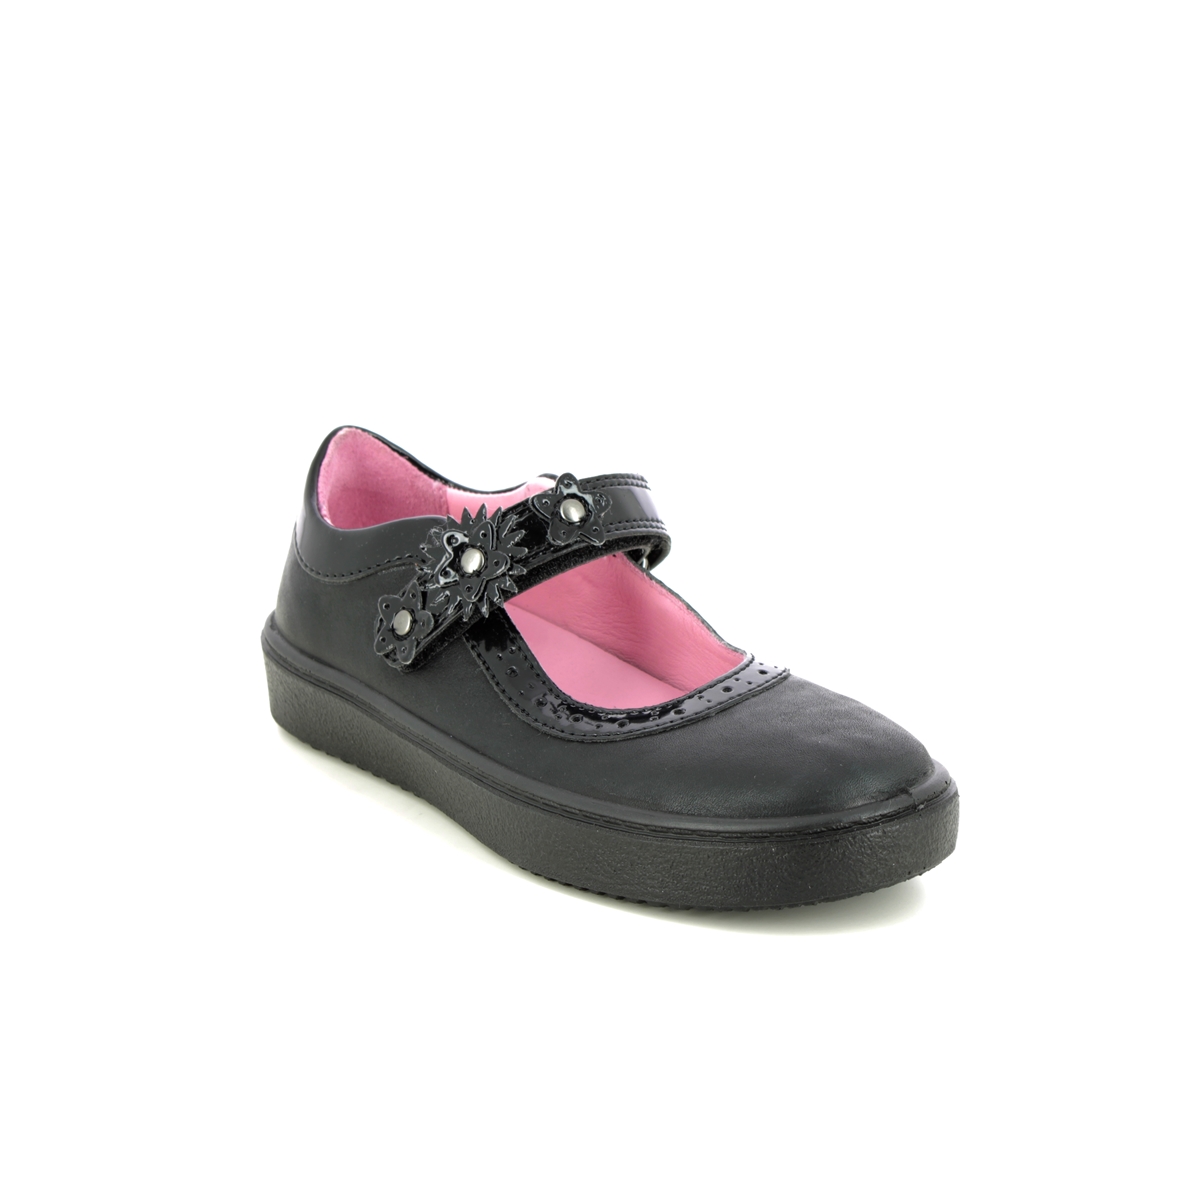 Superfit Heaven Mary Jane Black Leather Kids Girls Shoes 1006491-0000 In Size 33 In Plain Black Leather For School For kids